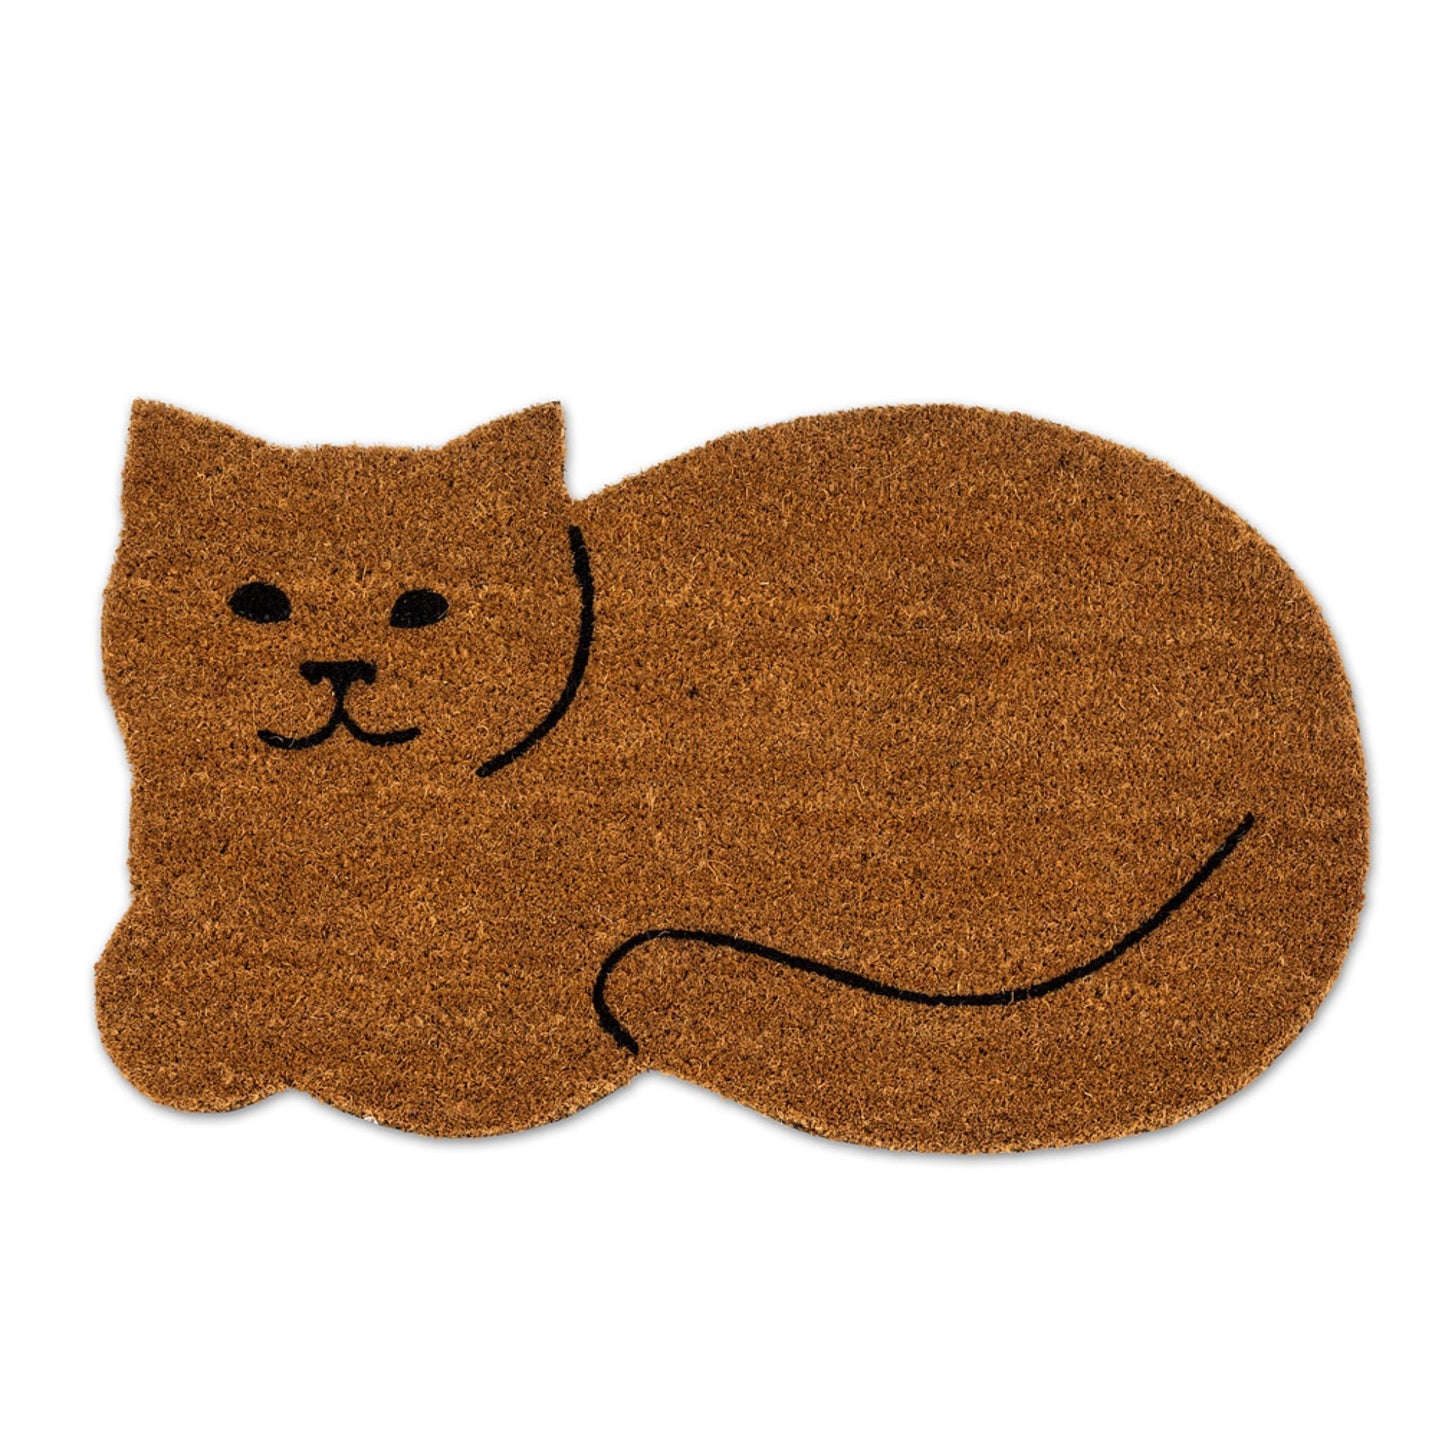 Doormat "Purrfect Place" - Tiny Tiger Gift Shop